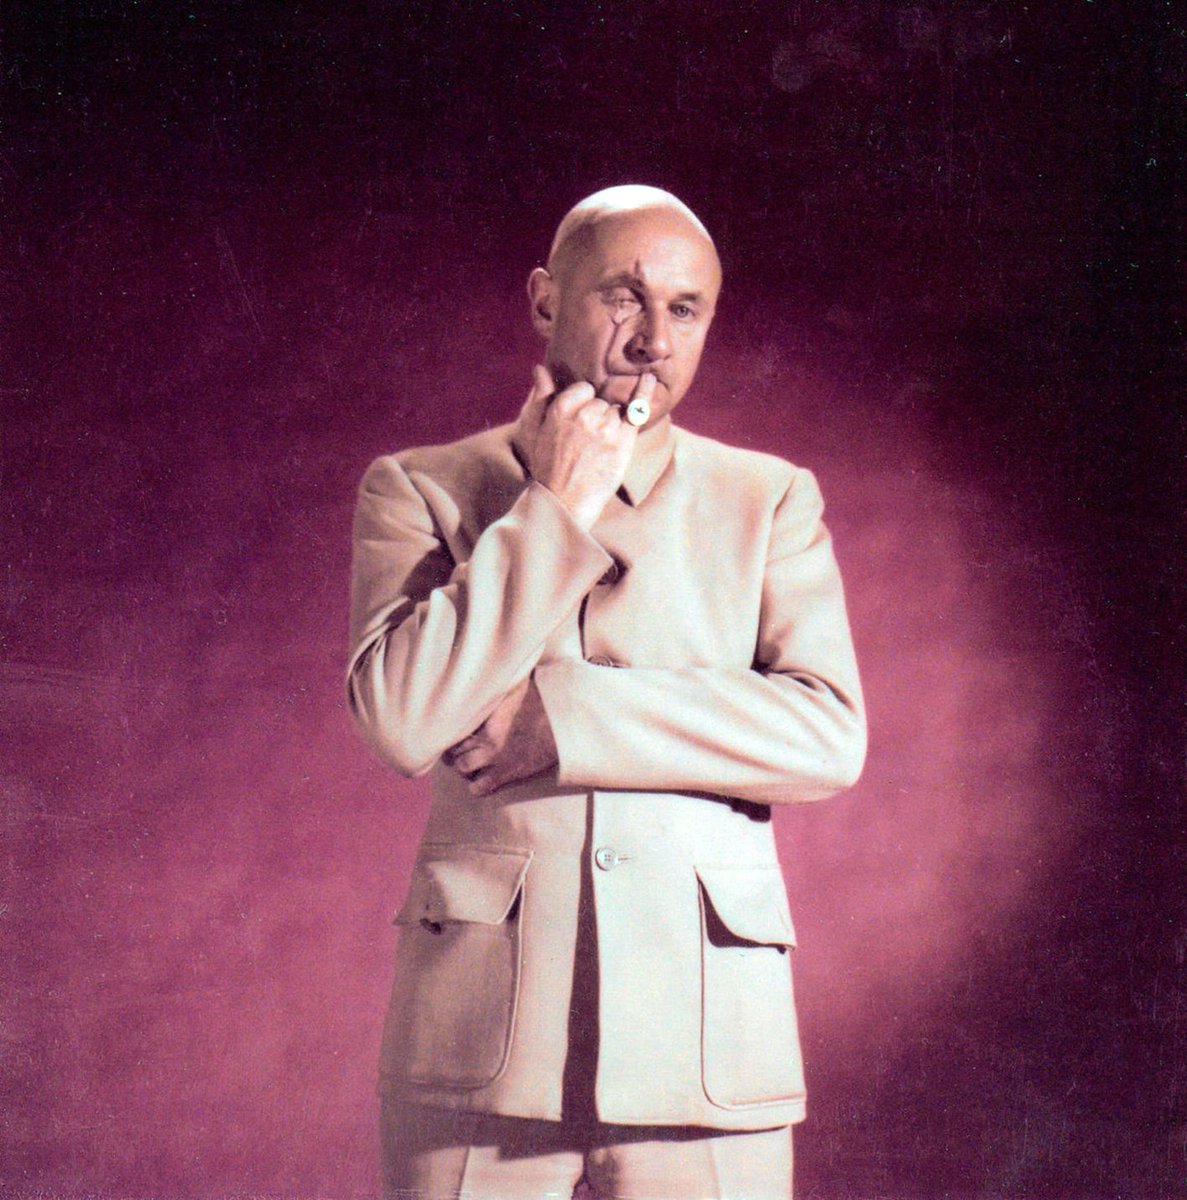 Thunderballs No Twitter A Promotional Still Of Donald Pleasence As Ernst Stavro Blofeld For You Only Live Twice 1967 Bond Jamesbond Oo7 T Co Ftykjylz7r Twitter